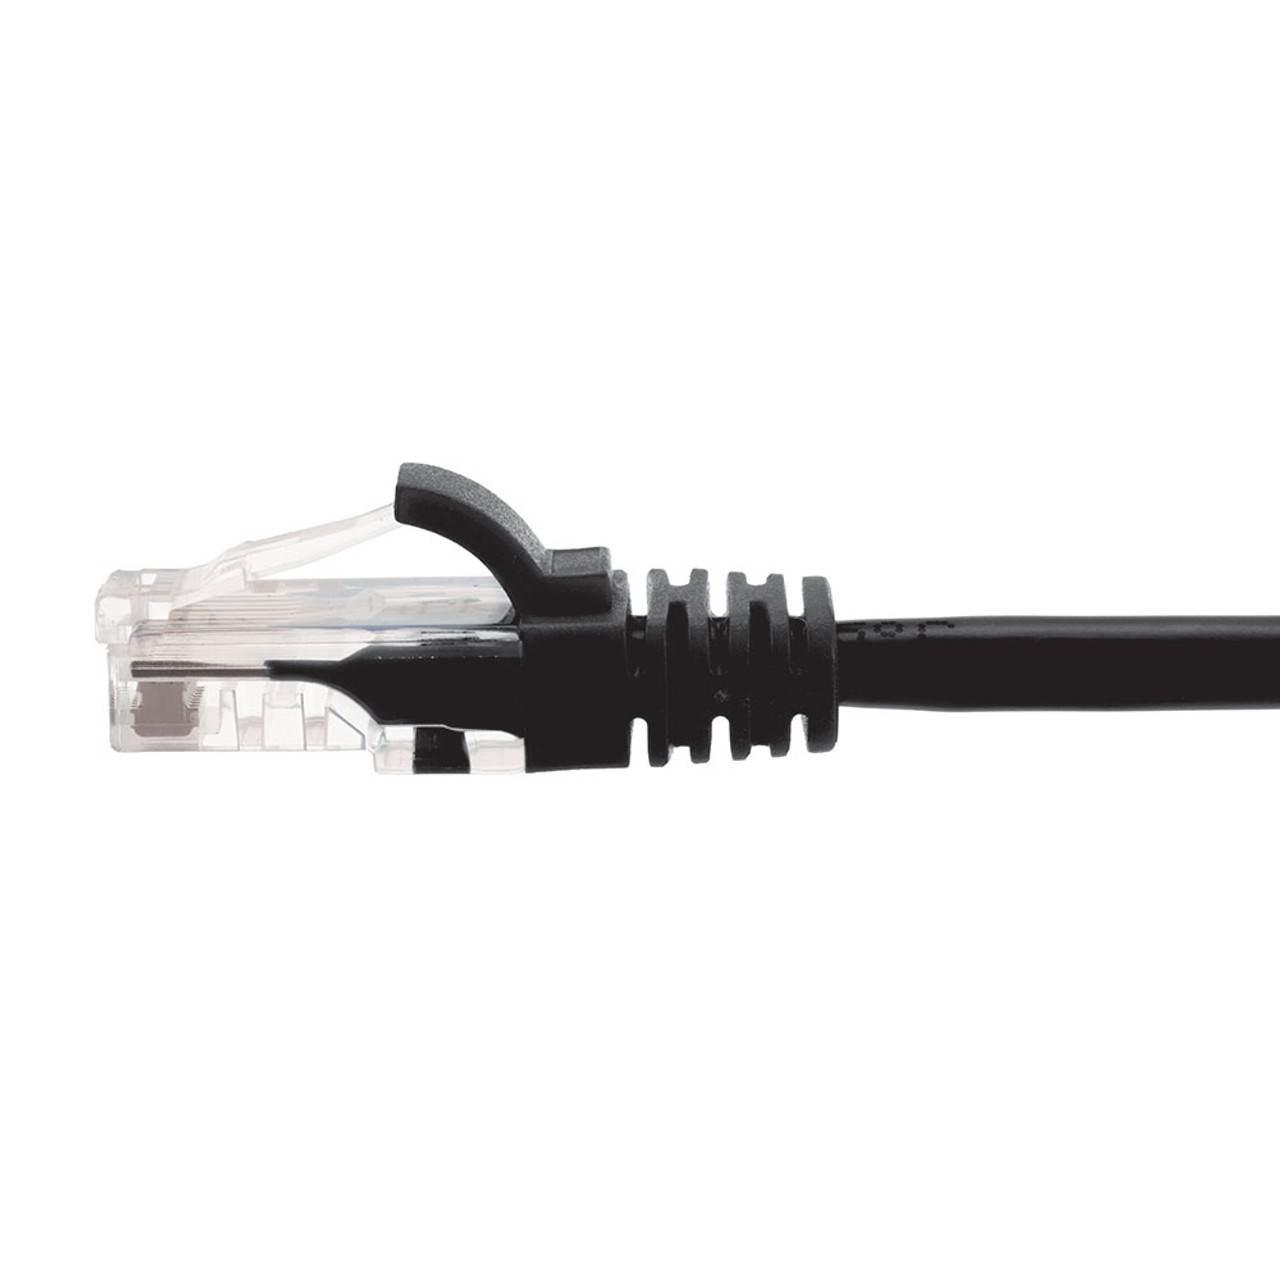 Ethernet Patch Cable CAT5E, UTP, 24AWG, 10 pack, Black: CAT5E